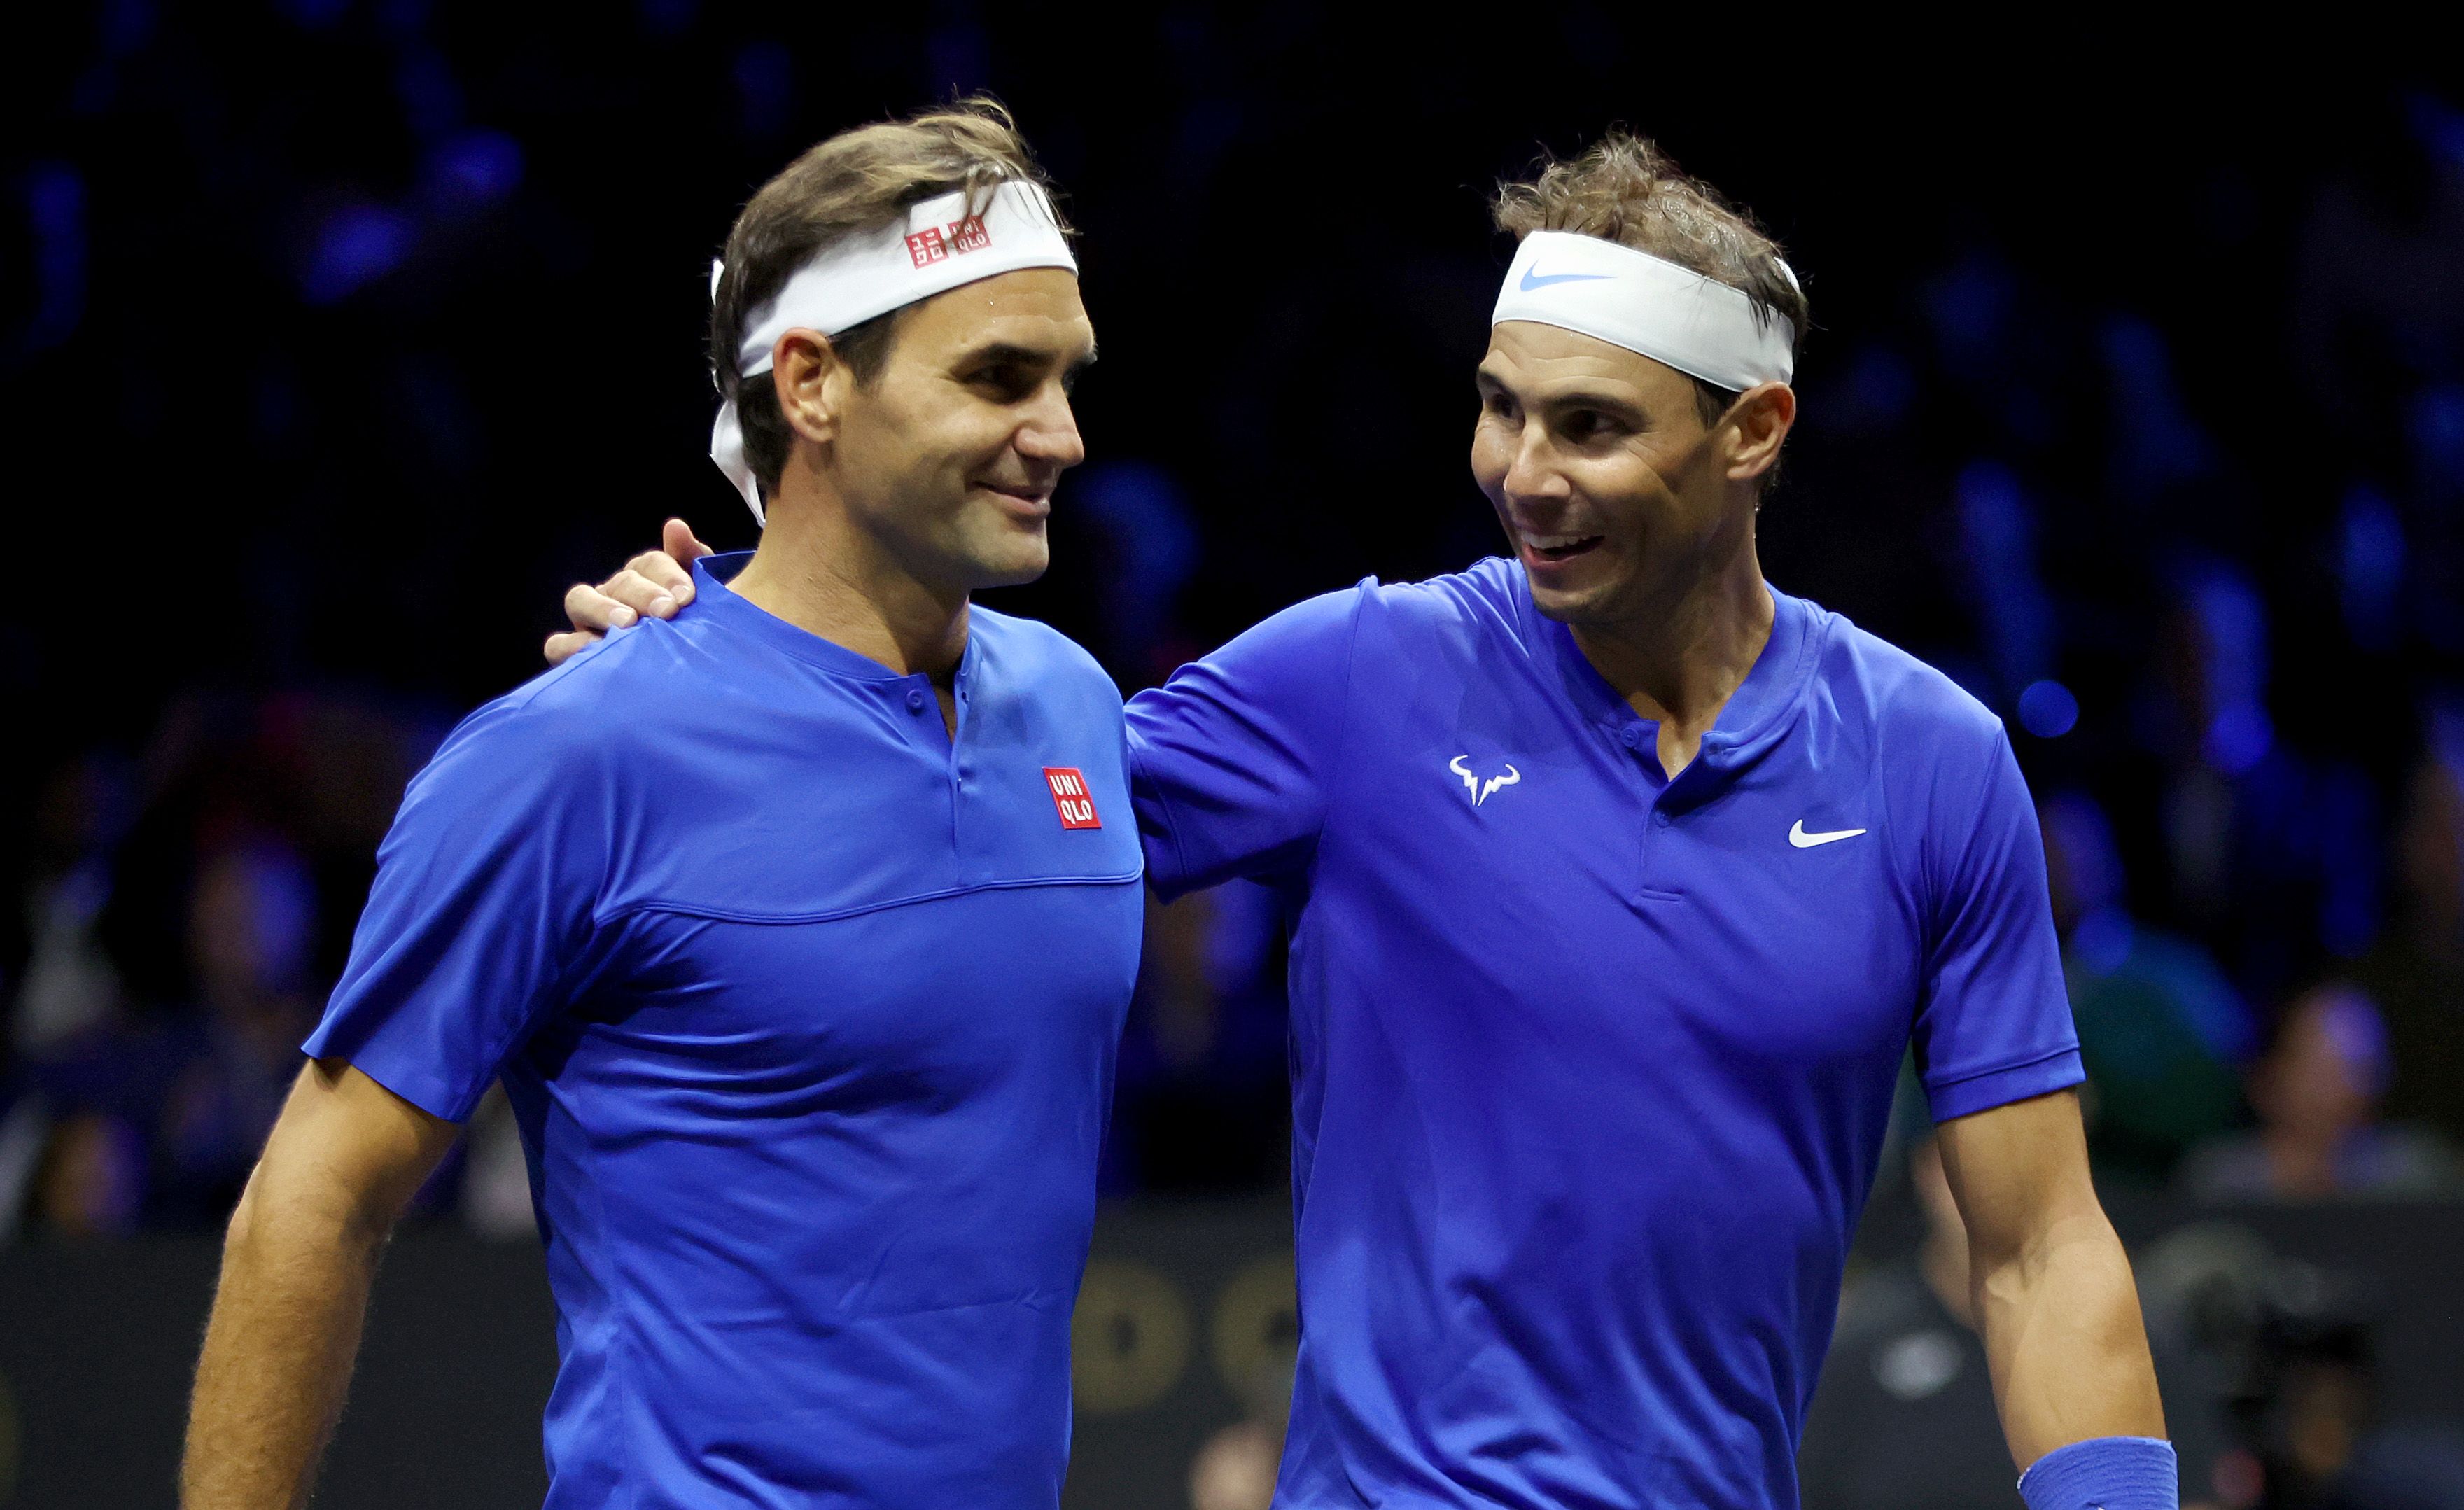 Rafael Nadal says 'a part of his life left' when Roger Federer